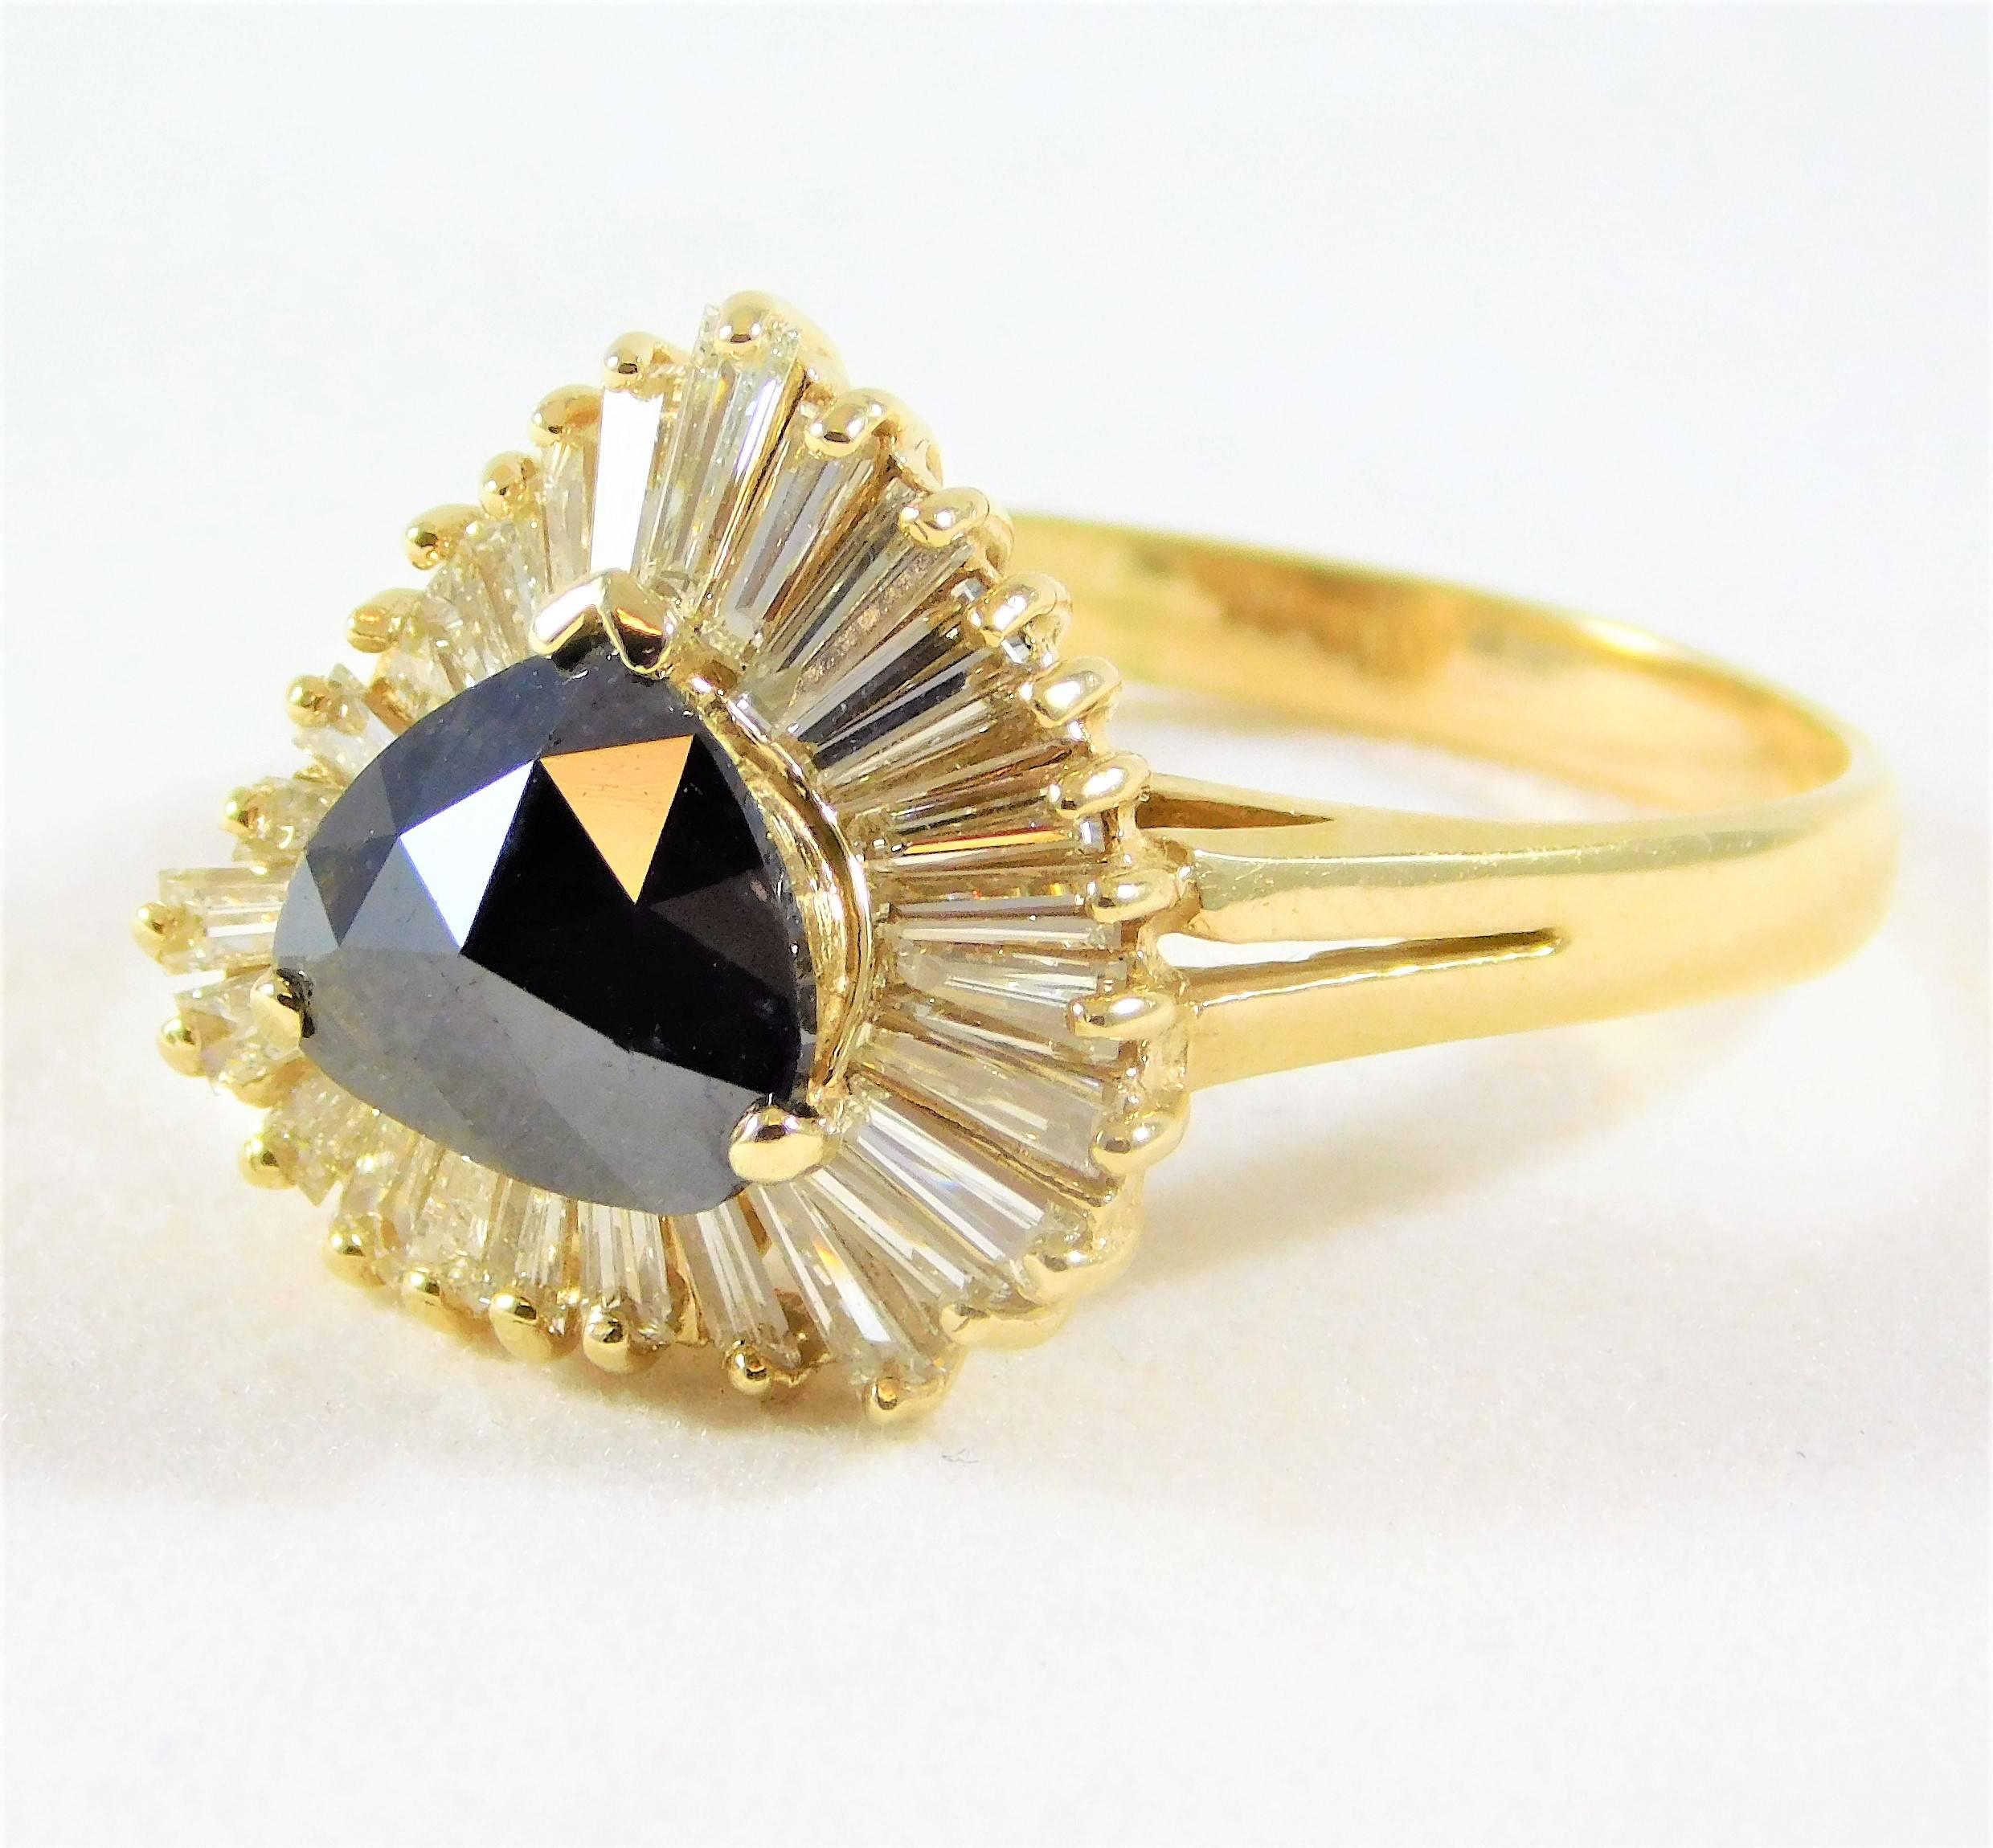 Deep Blue 2.25 Carat Sapphire Diamond Yellow Gold Ballerina Ring In Excellent Condition For Sale In Metairie, LA